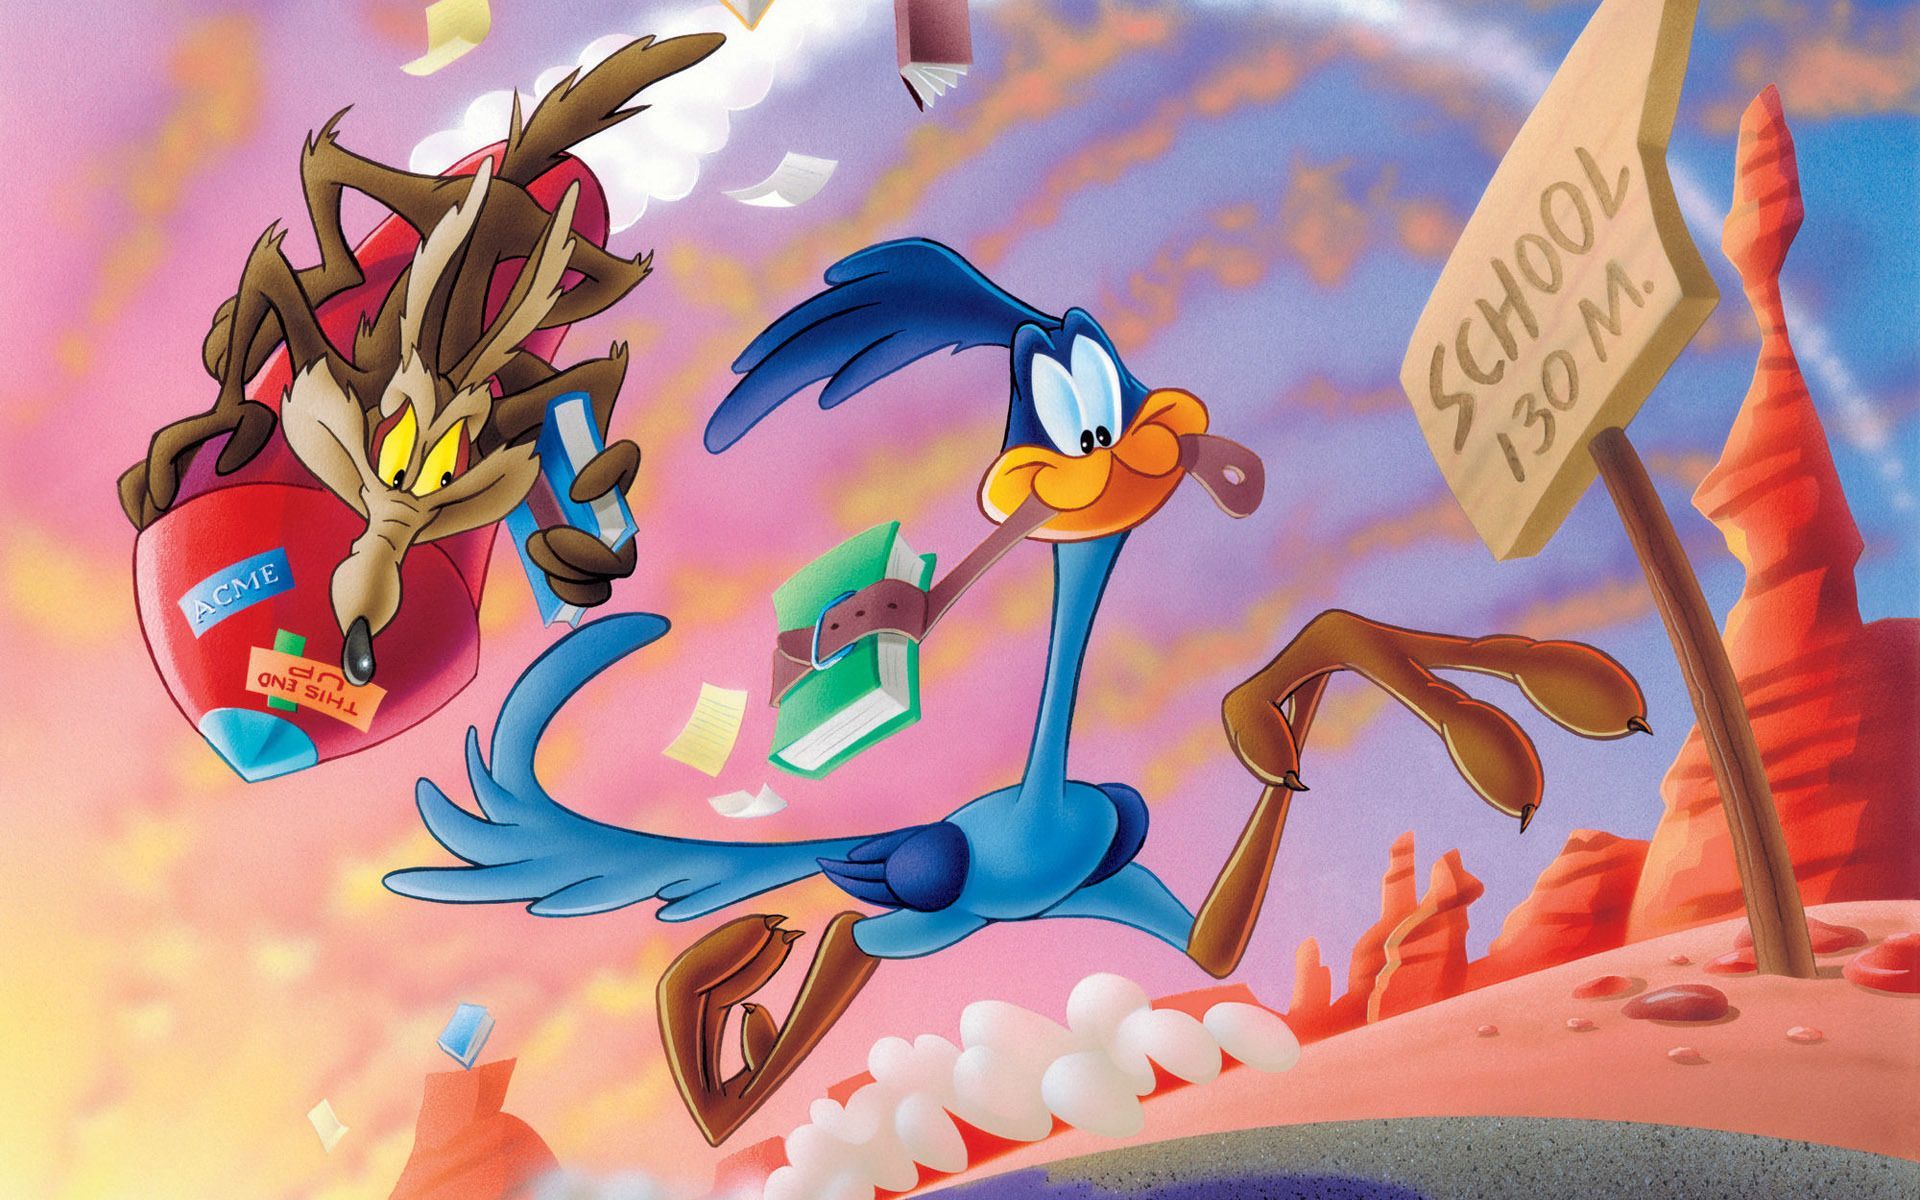 Wile E. Coyote and The Road Runner. Looney tunes